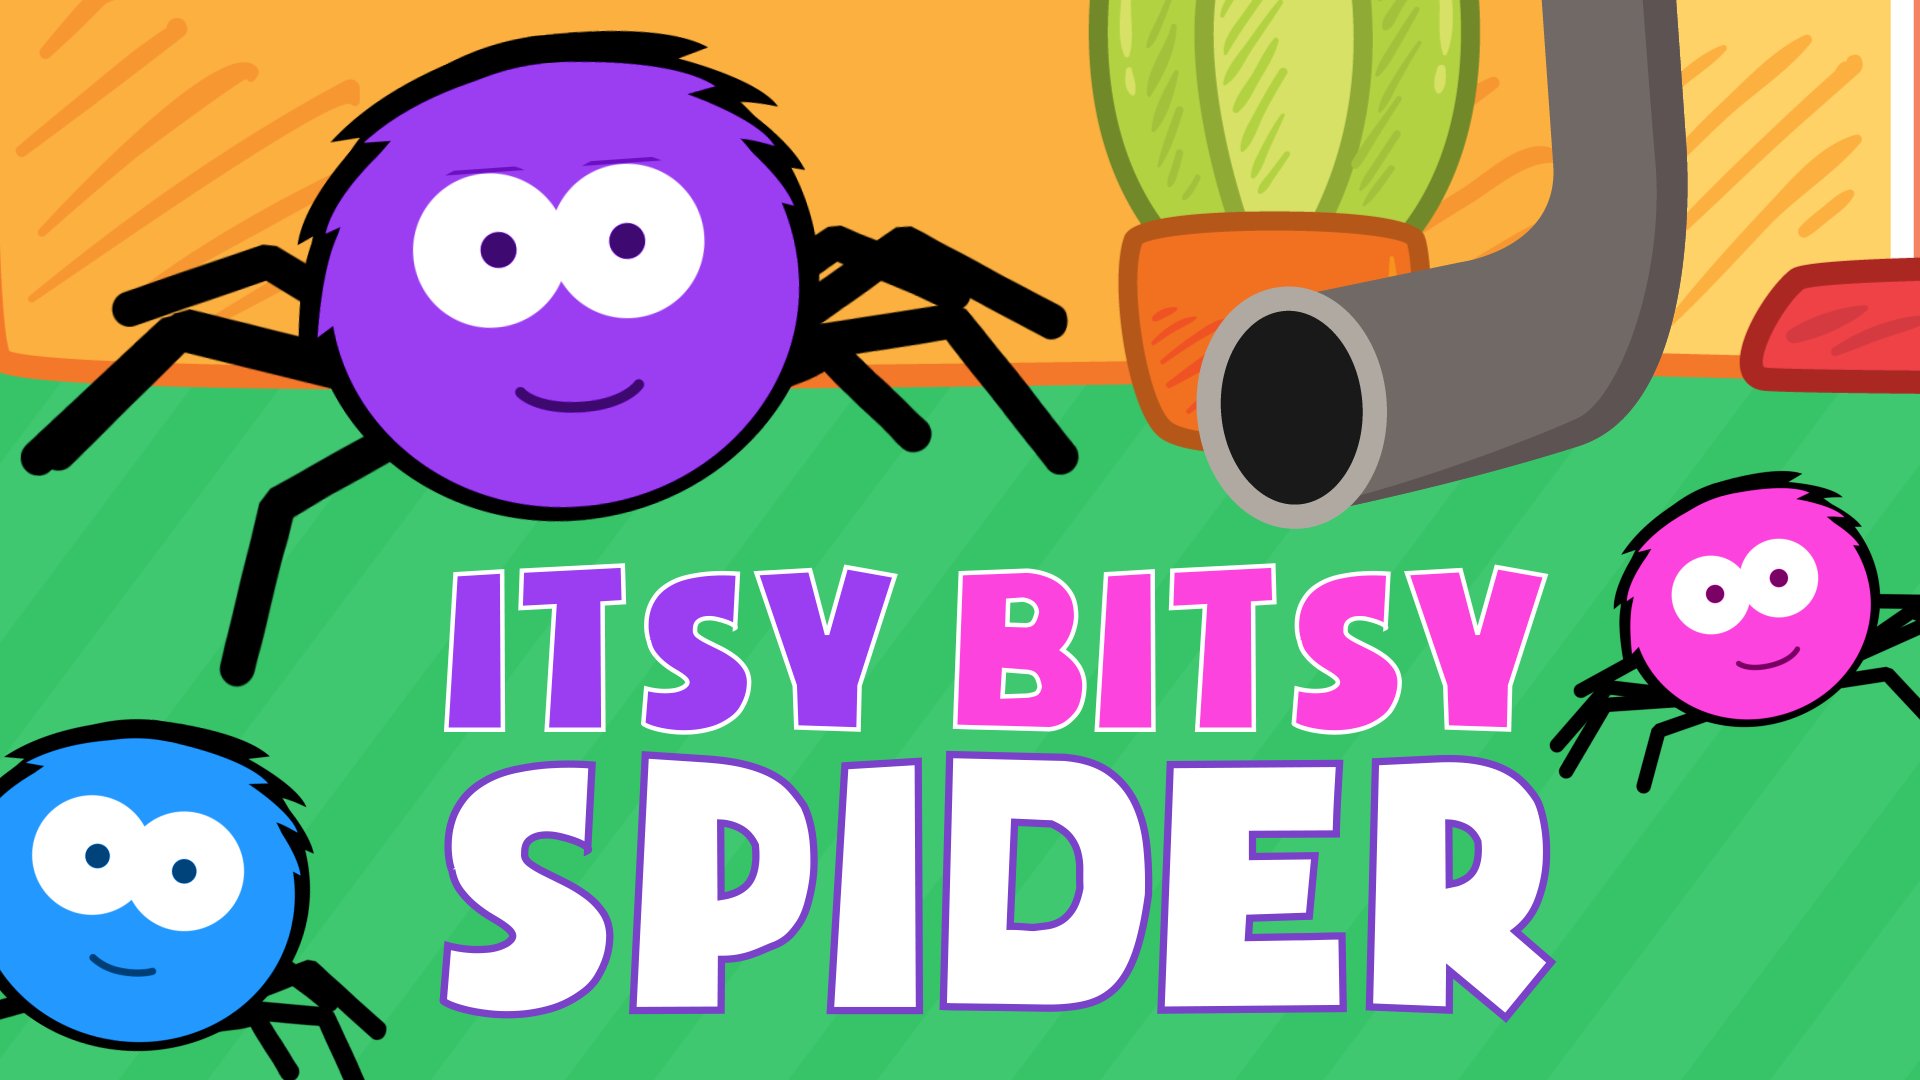 Spider songs. The Itsy Bitsy Spider Song. Itsy Bitsy Spider Nursery Rhymes. Little Spider Song. Itsy Bitsy Spider Scary.